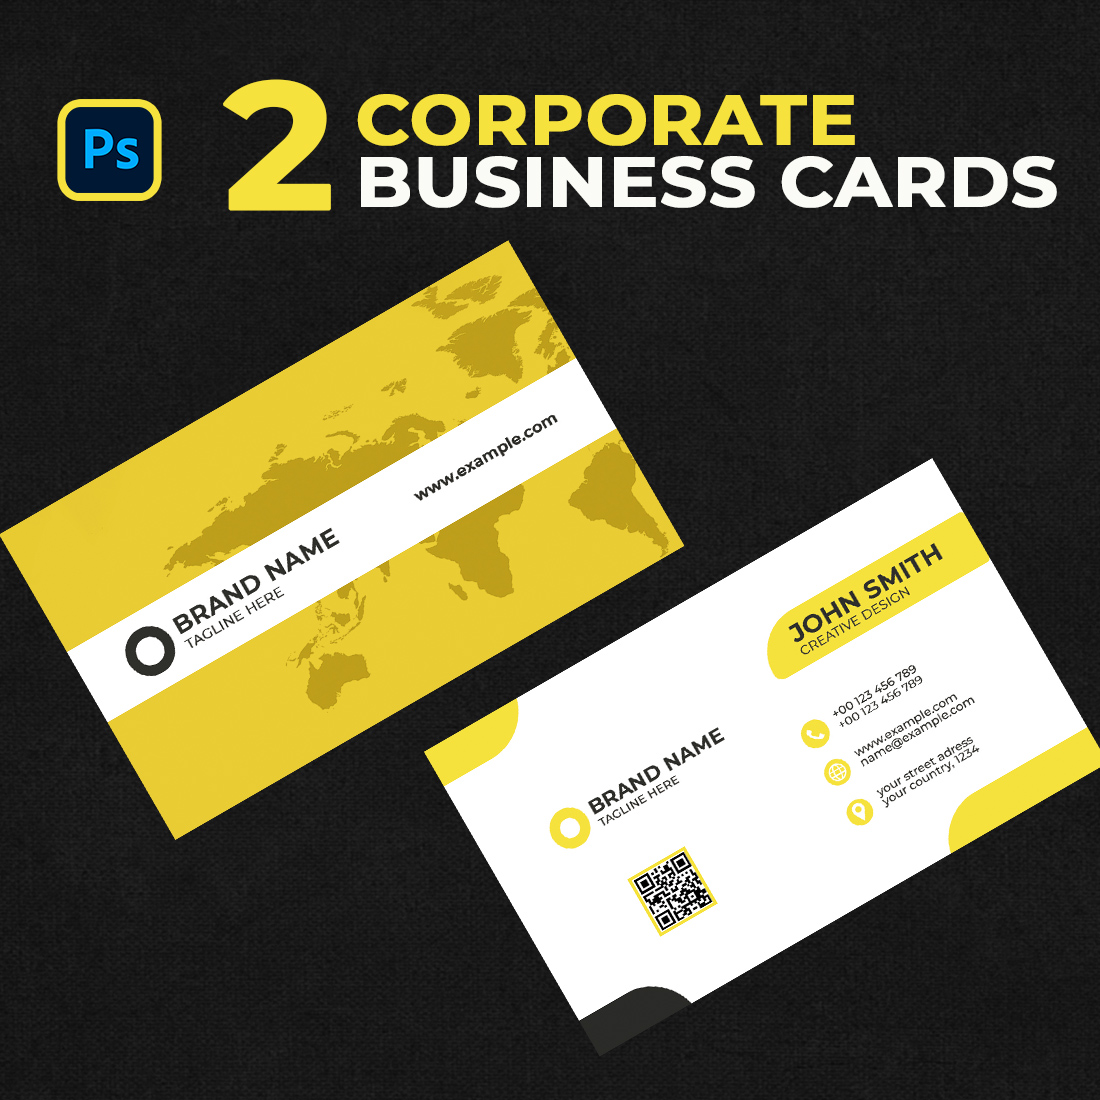 Print Ready Creative Business Card cover image.